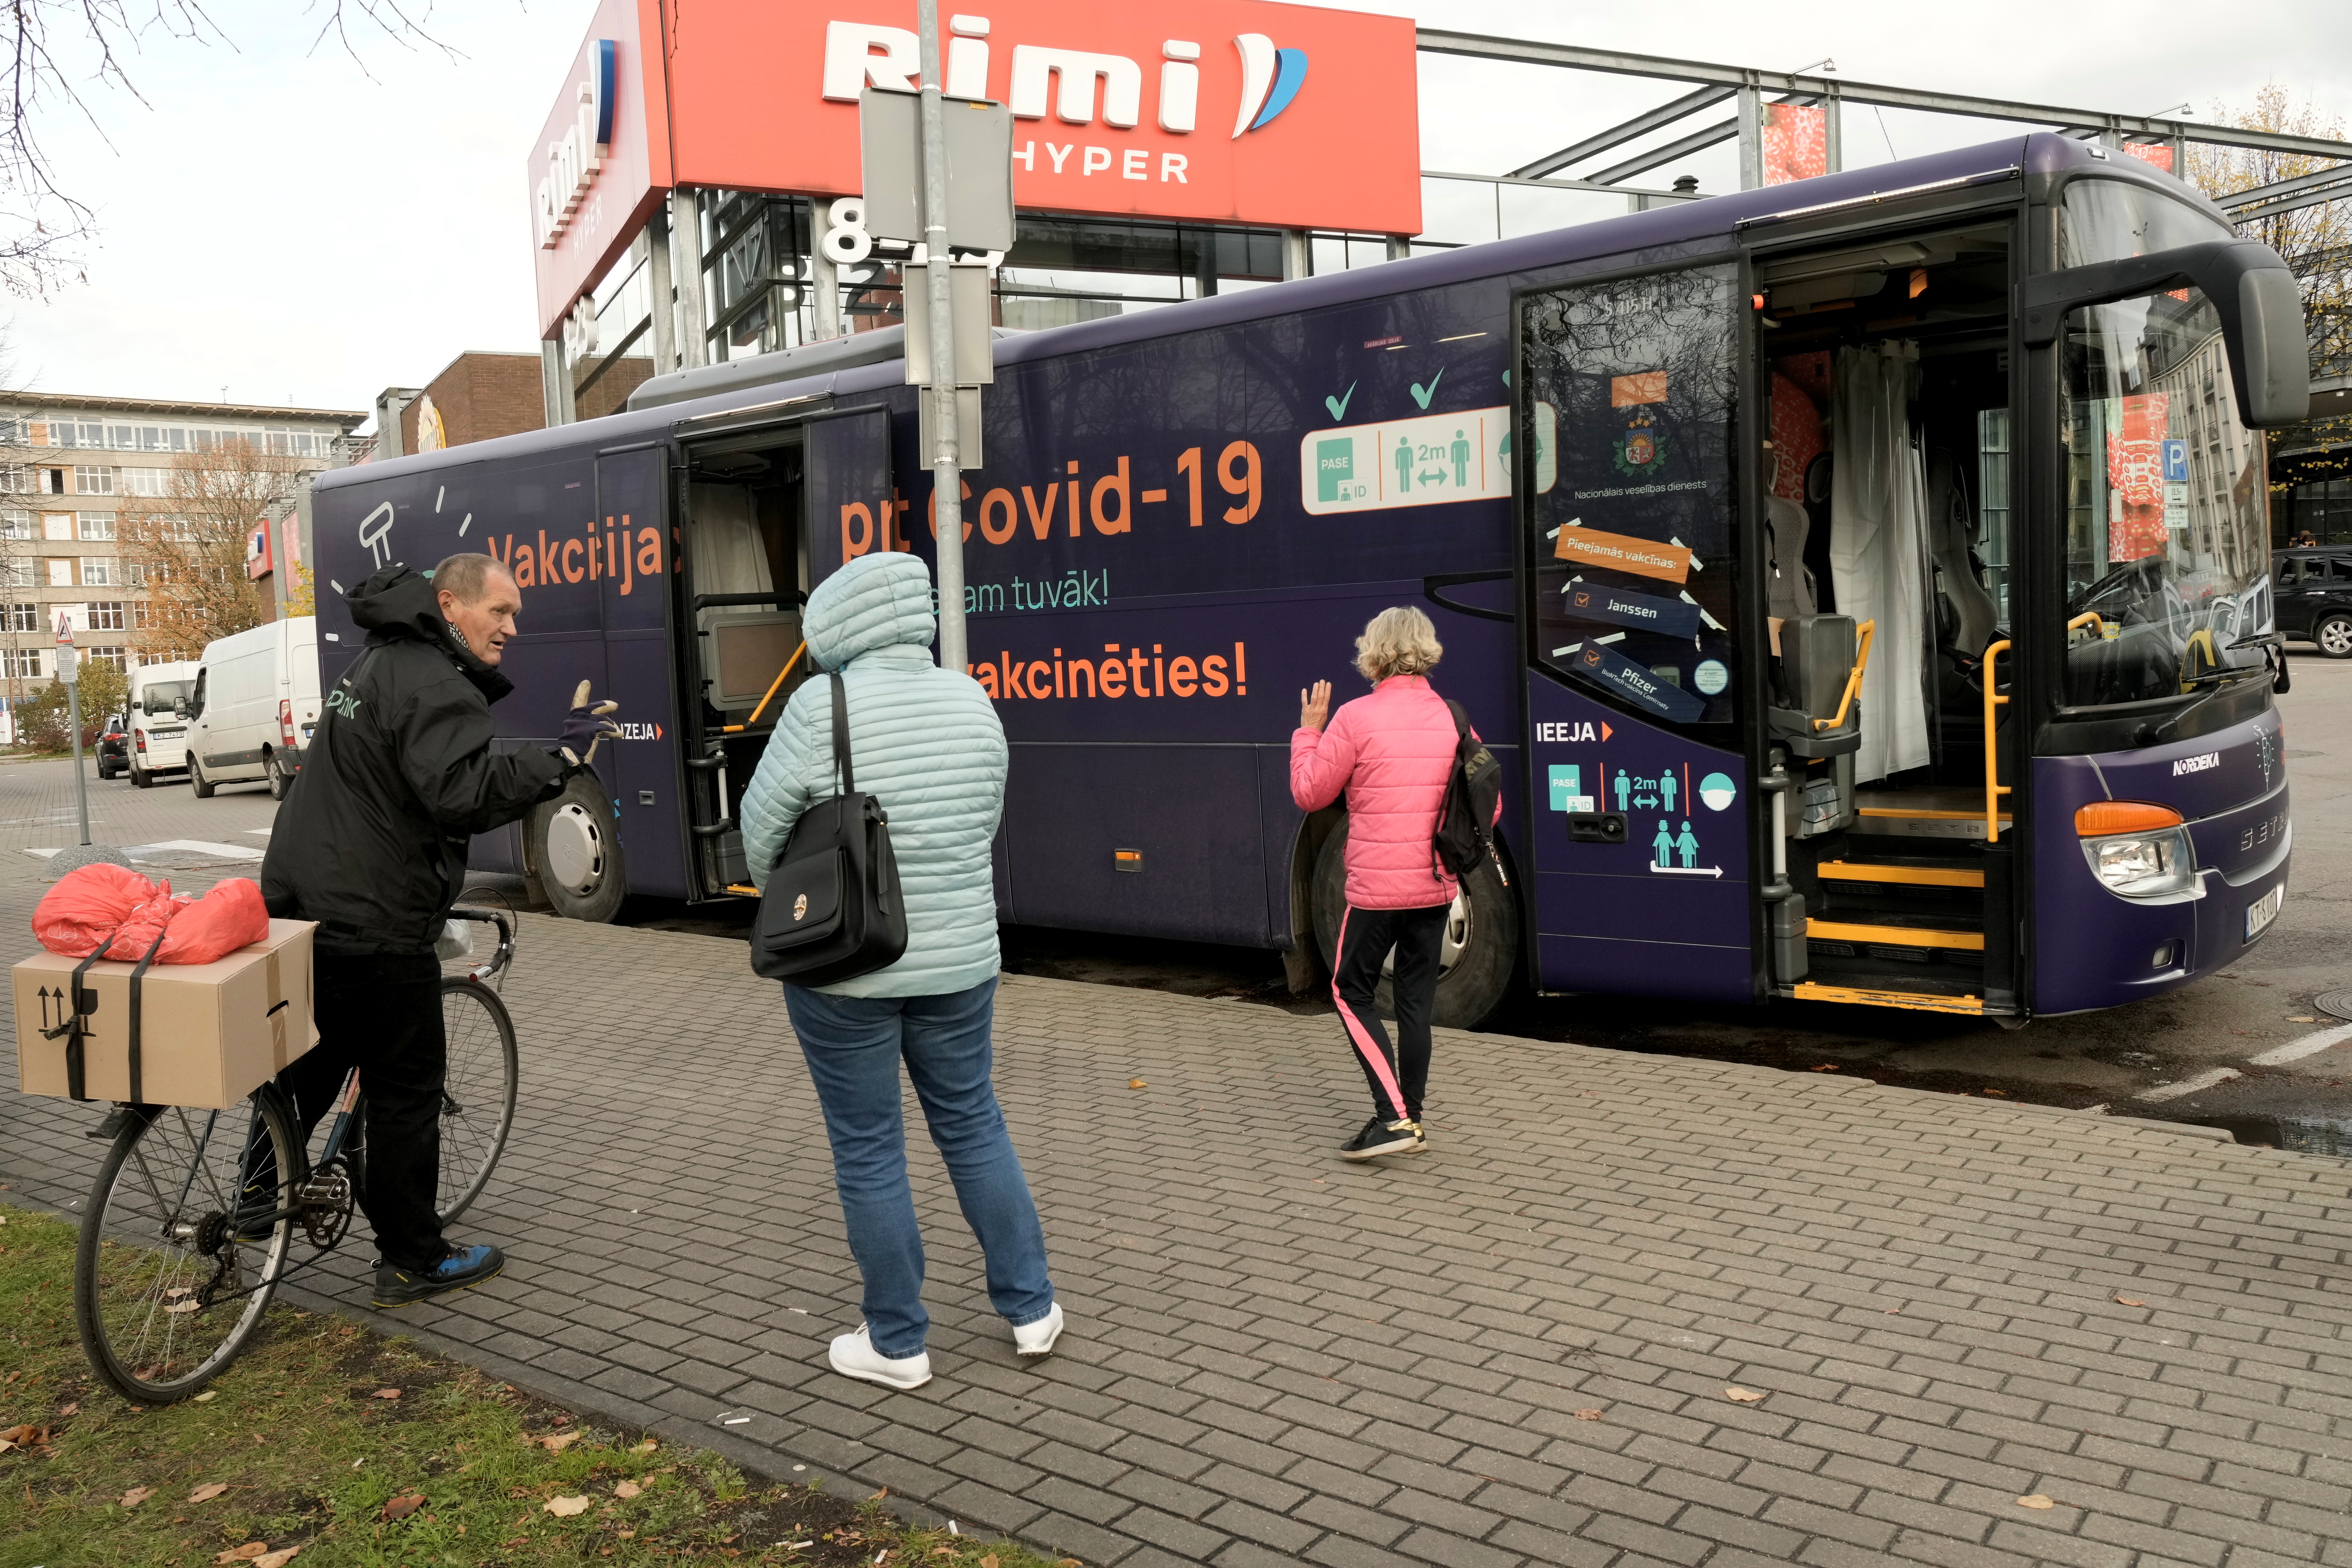 People wait to get inside a mobile coronavirus disease (COVID-19) vaccination bus next to the shopping center in Riga, Latvia October 19, 2021. Signs on a bus read 